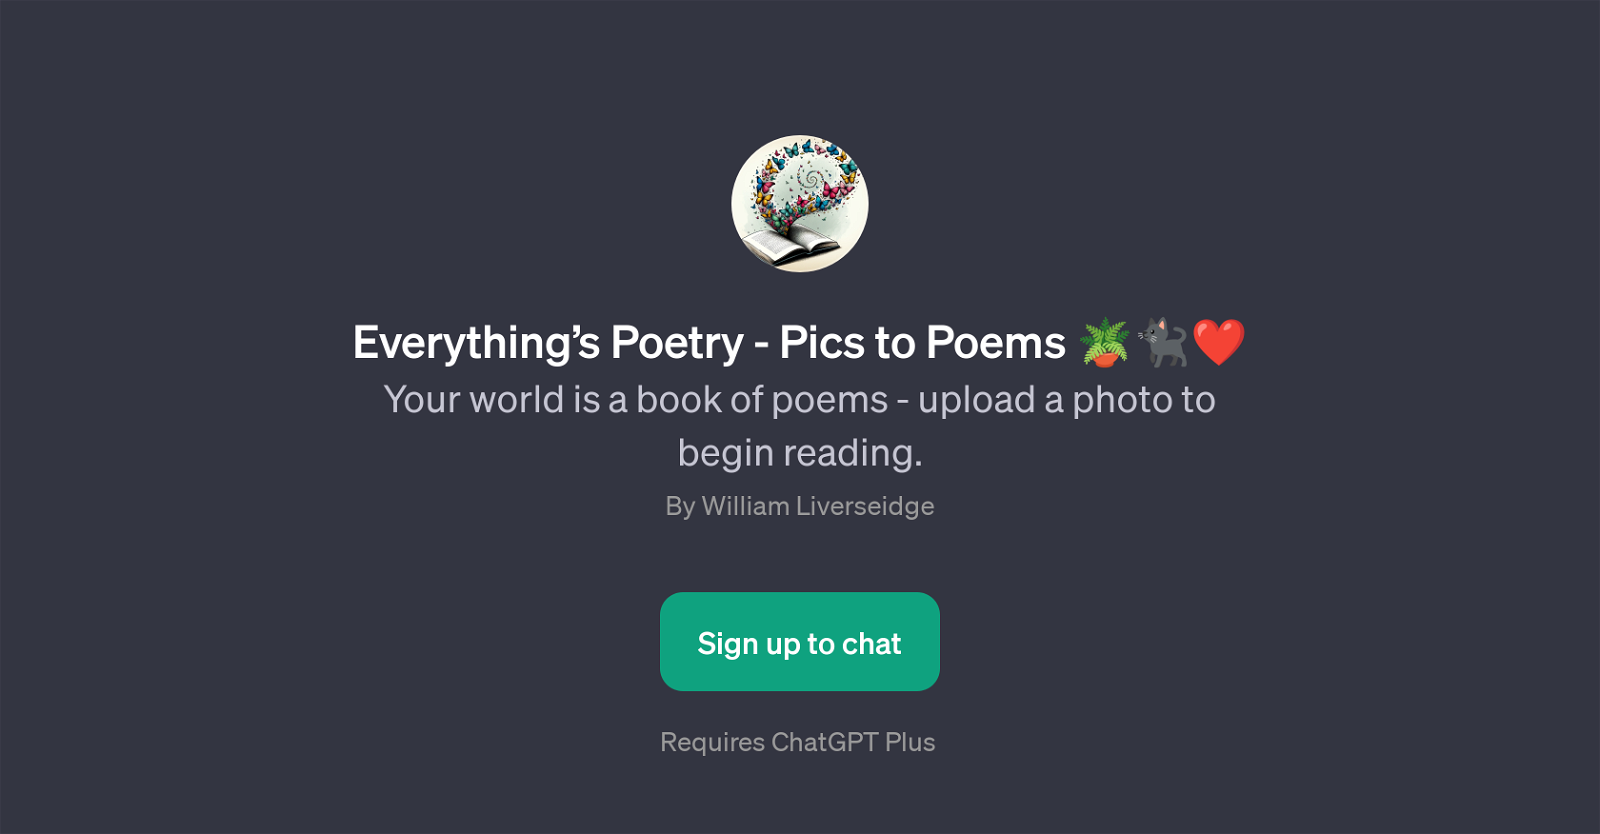 Everythings Poetry - Pics to Poems website